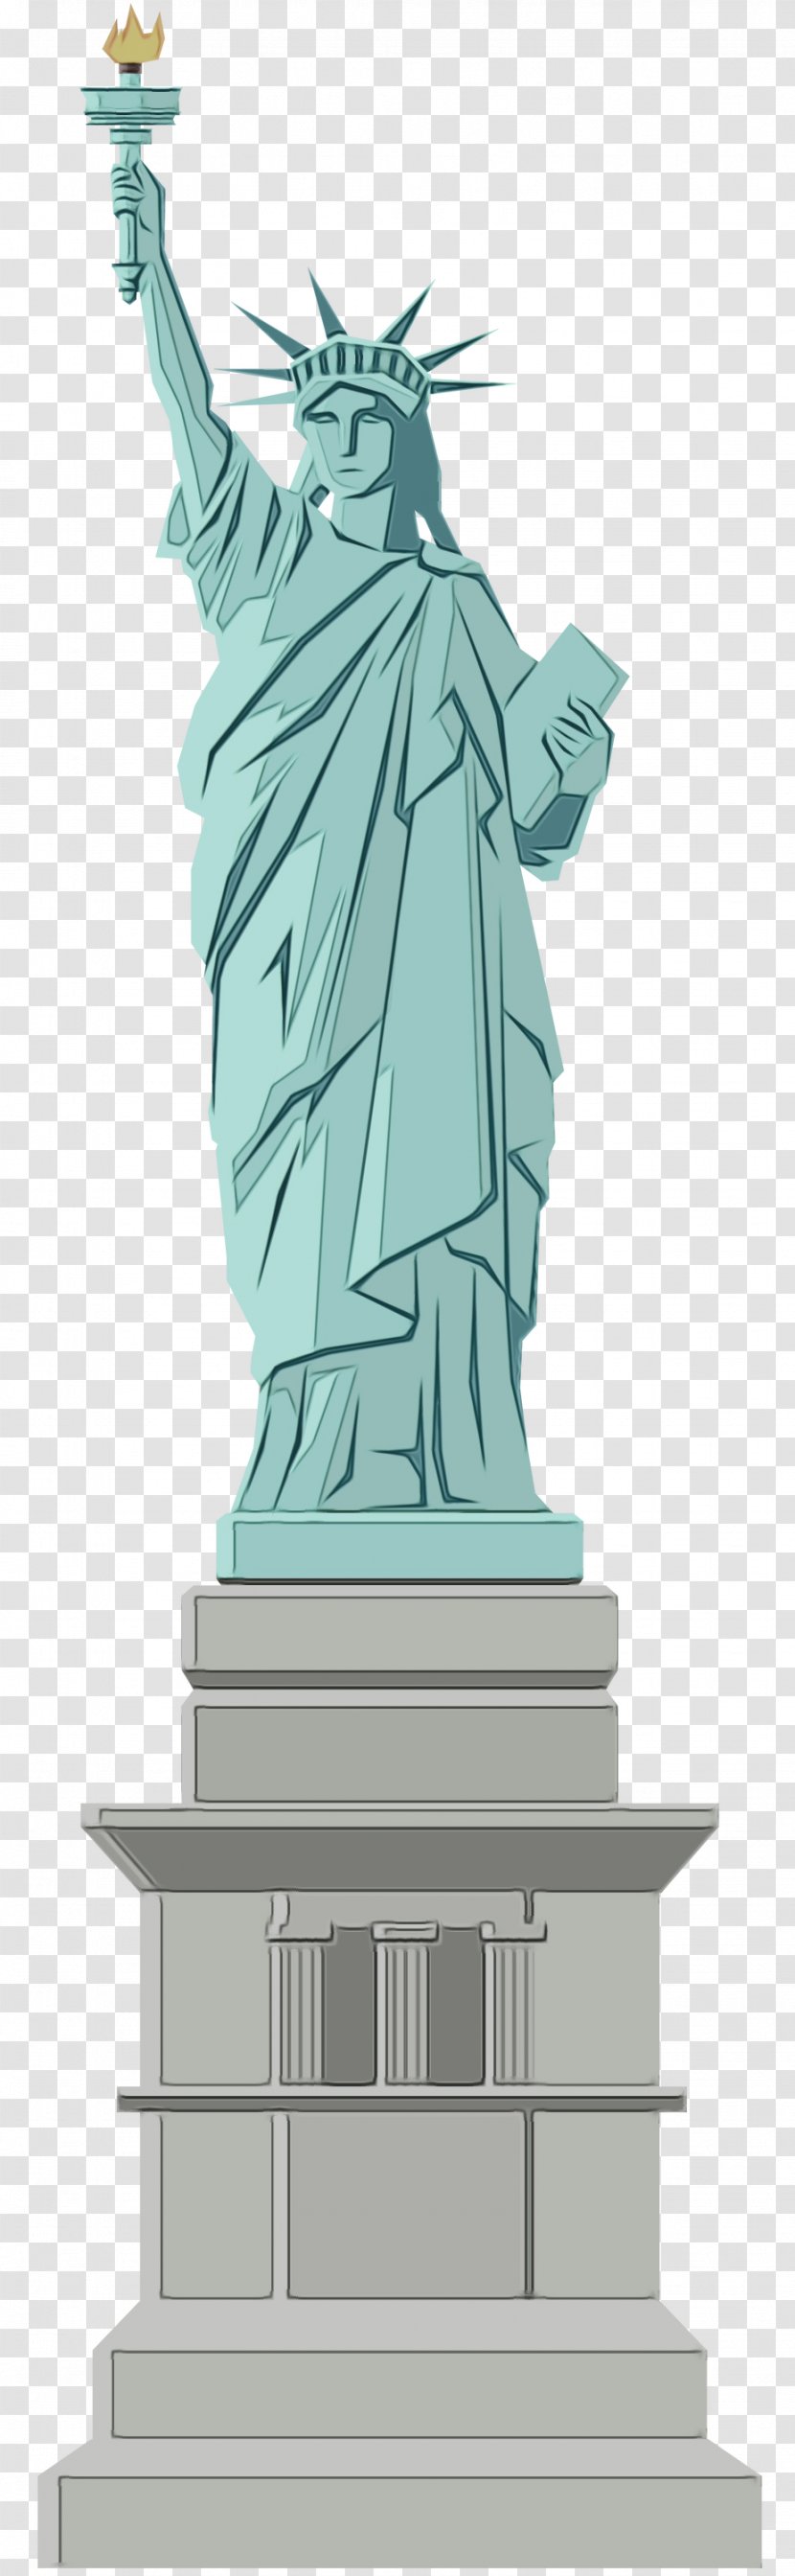 Statue Of Liberty National Monument Illustration Sculpture Drawing - Stone Carving Transparent PNG